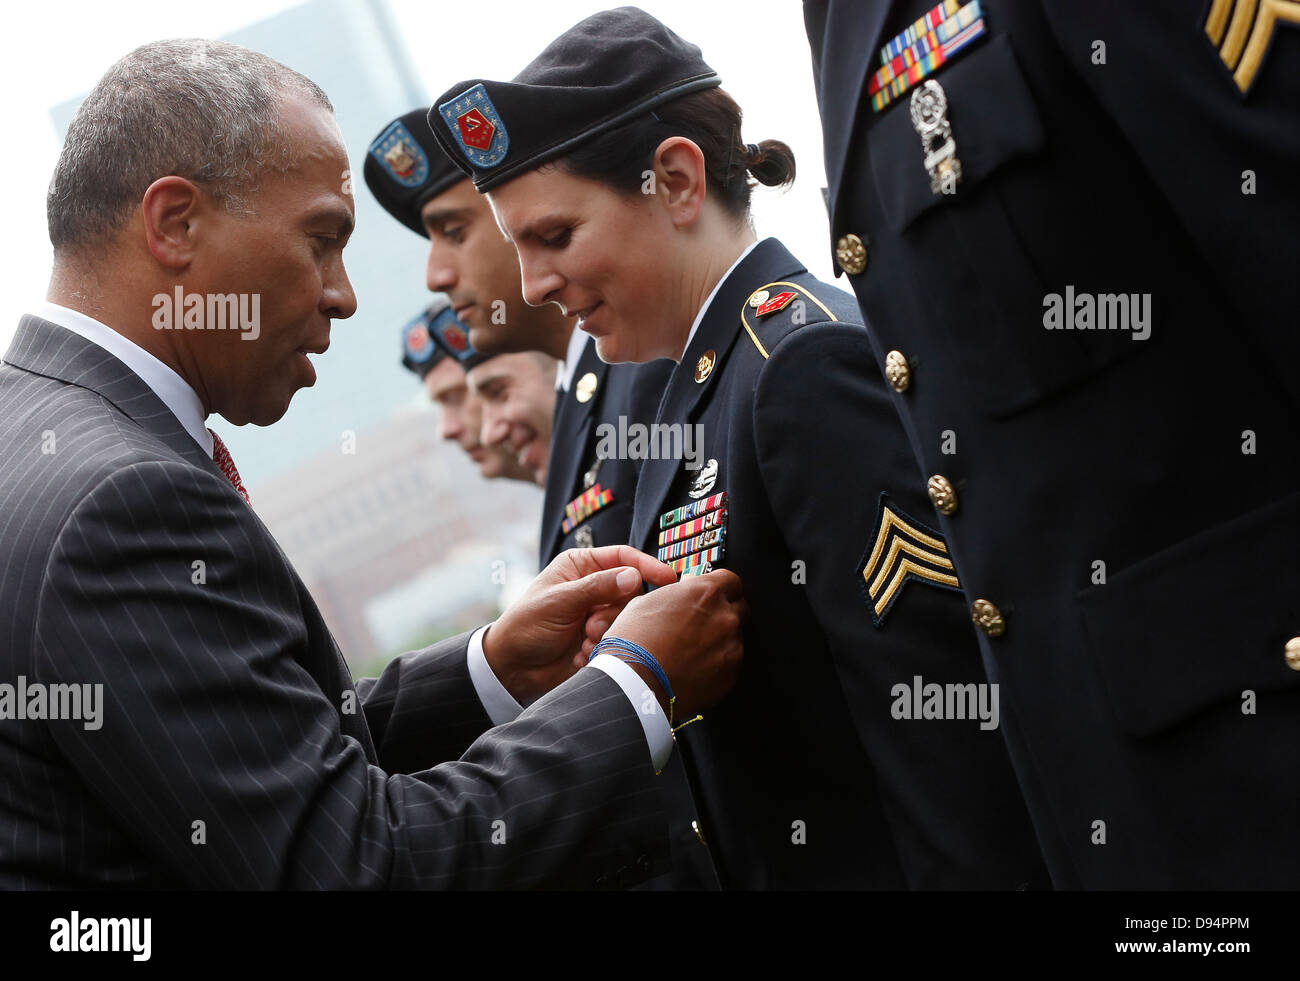 Massachusetts Governor Deval Patrick pins a medal on military service member Stock Photo